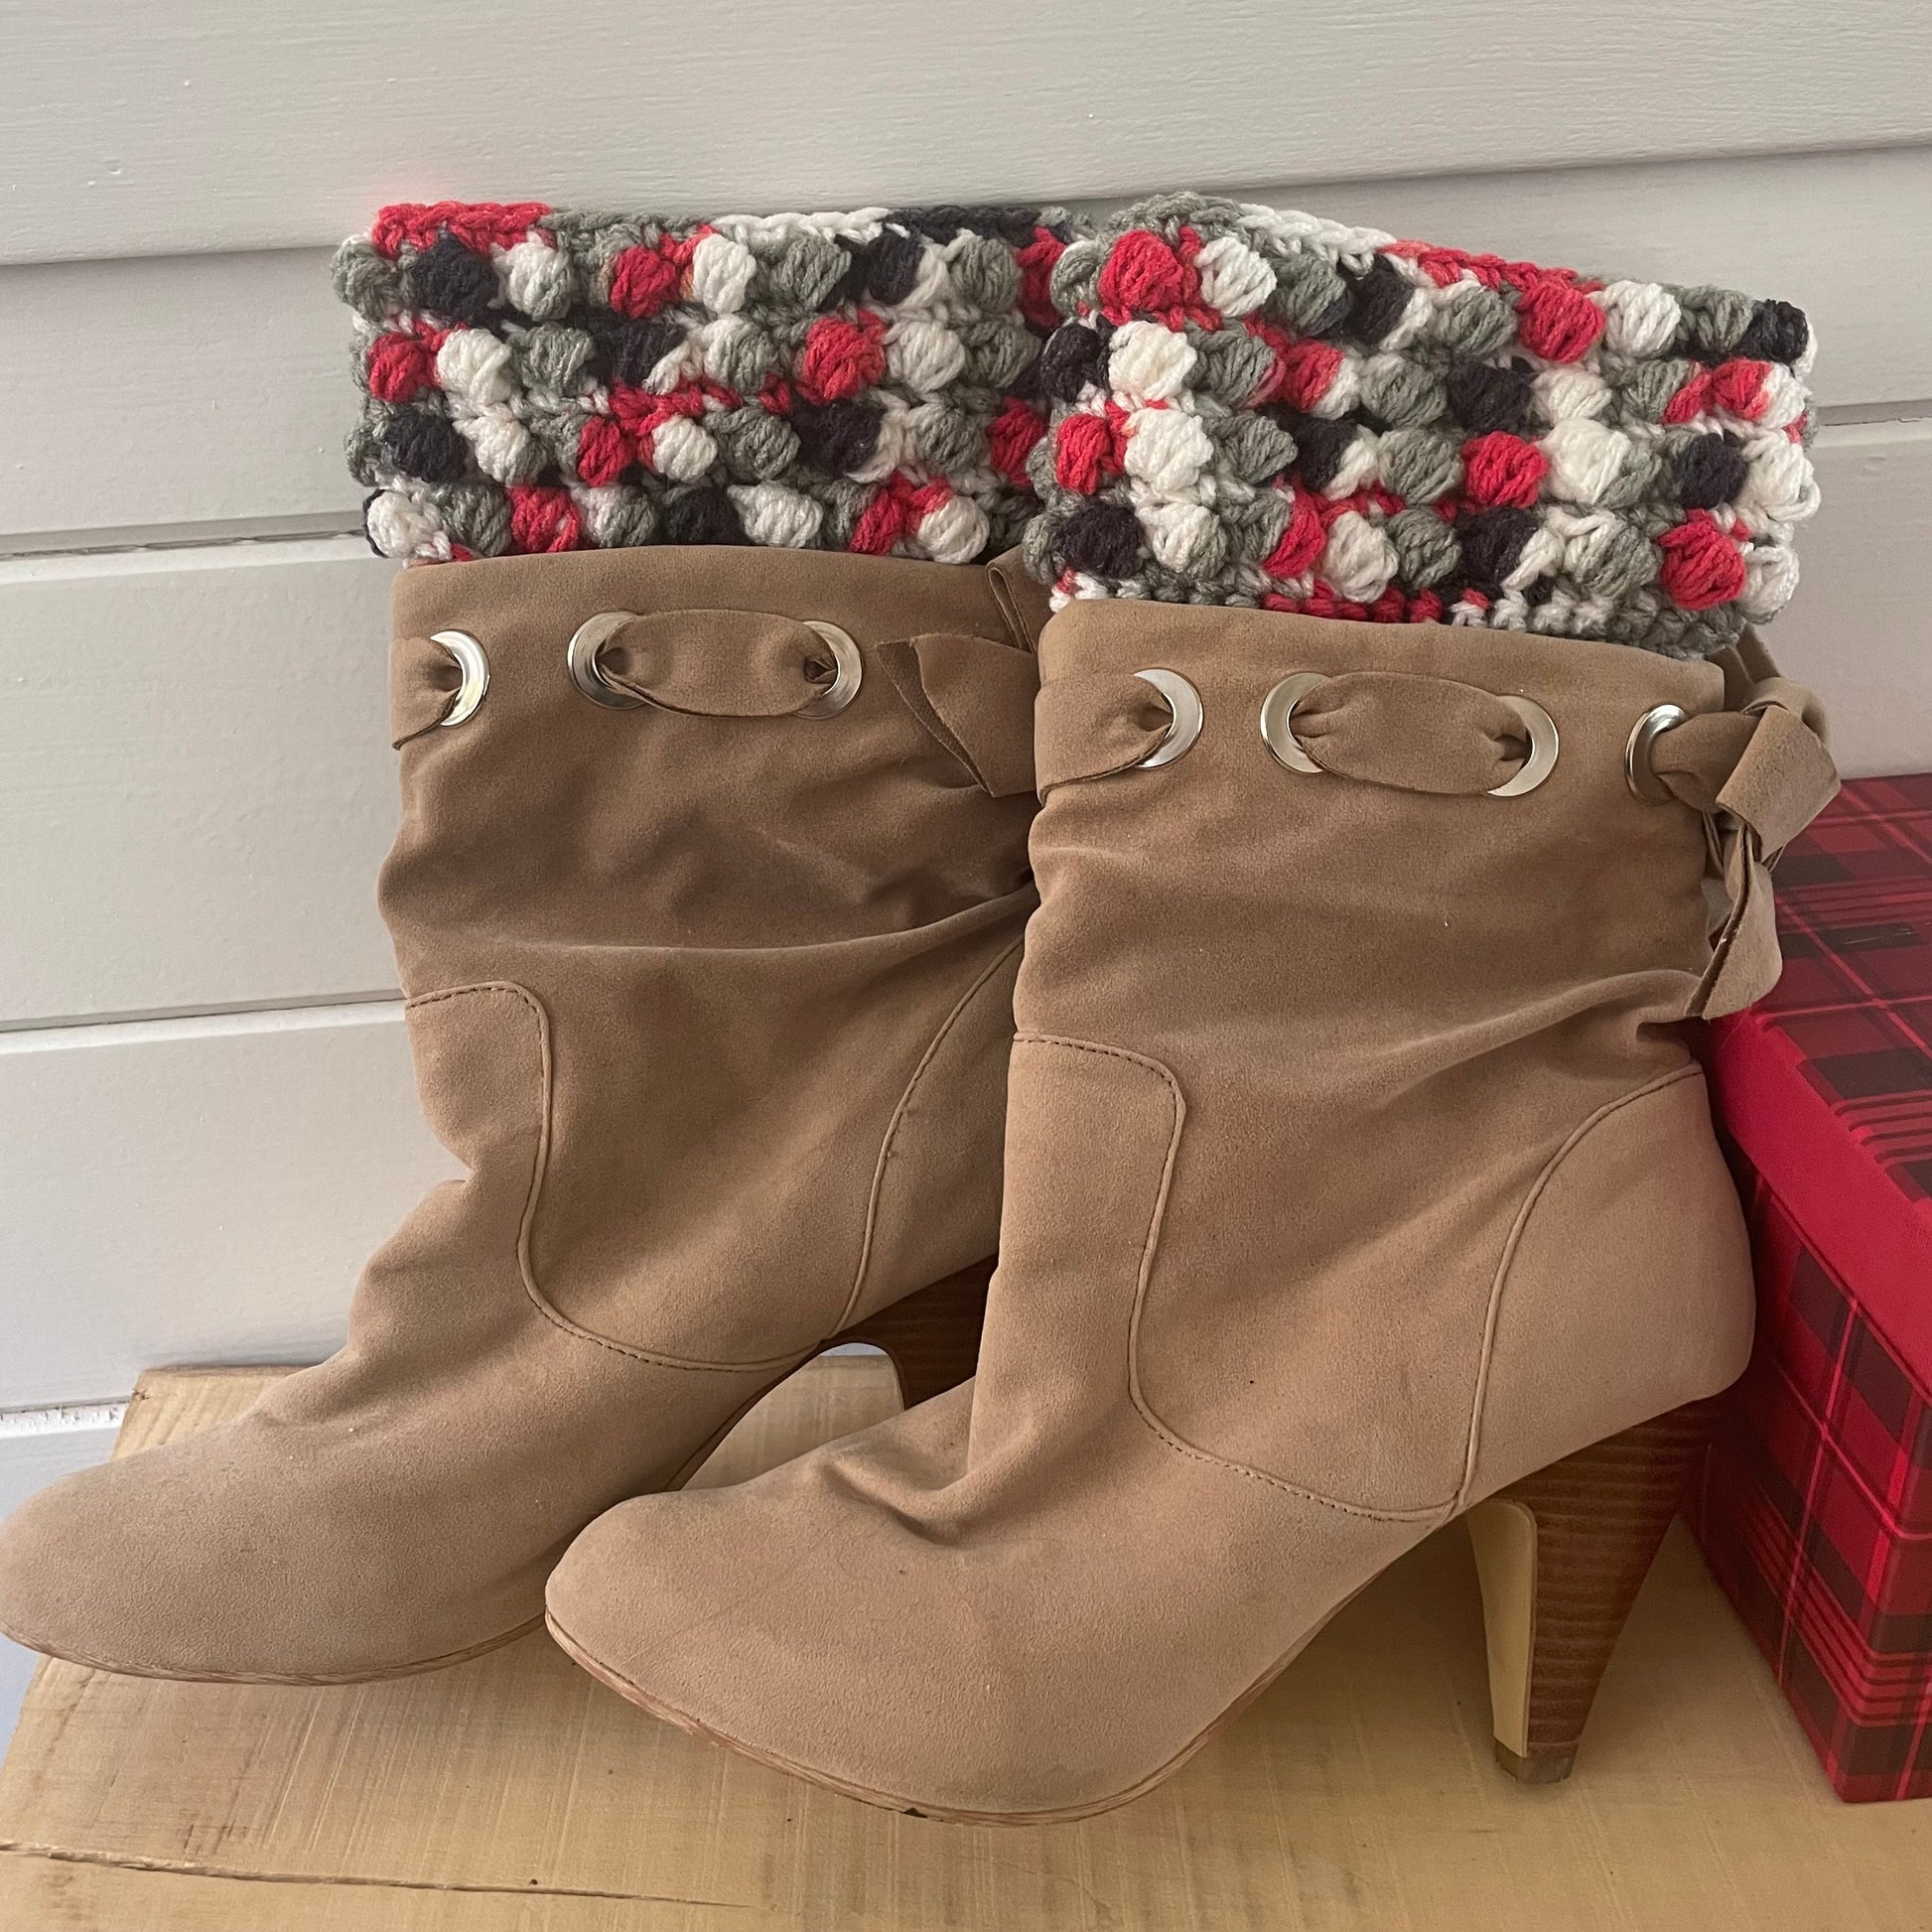 boot cuffs displayed with light tan boots